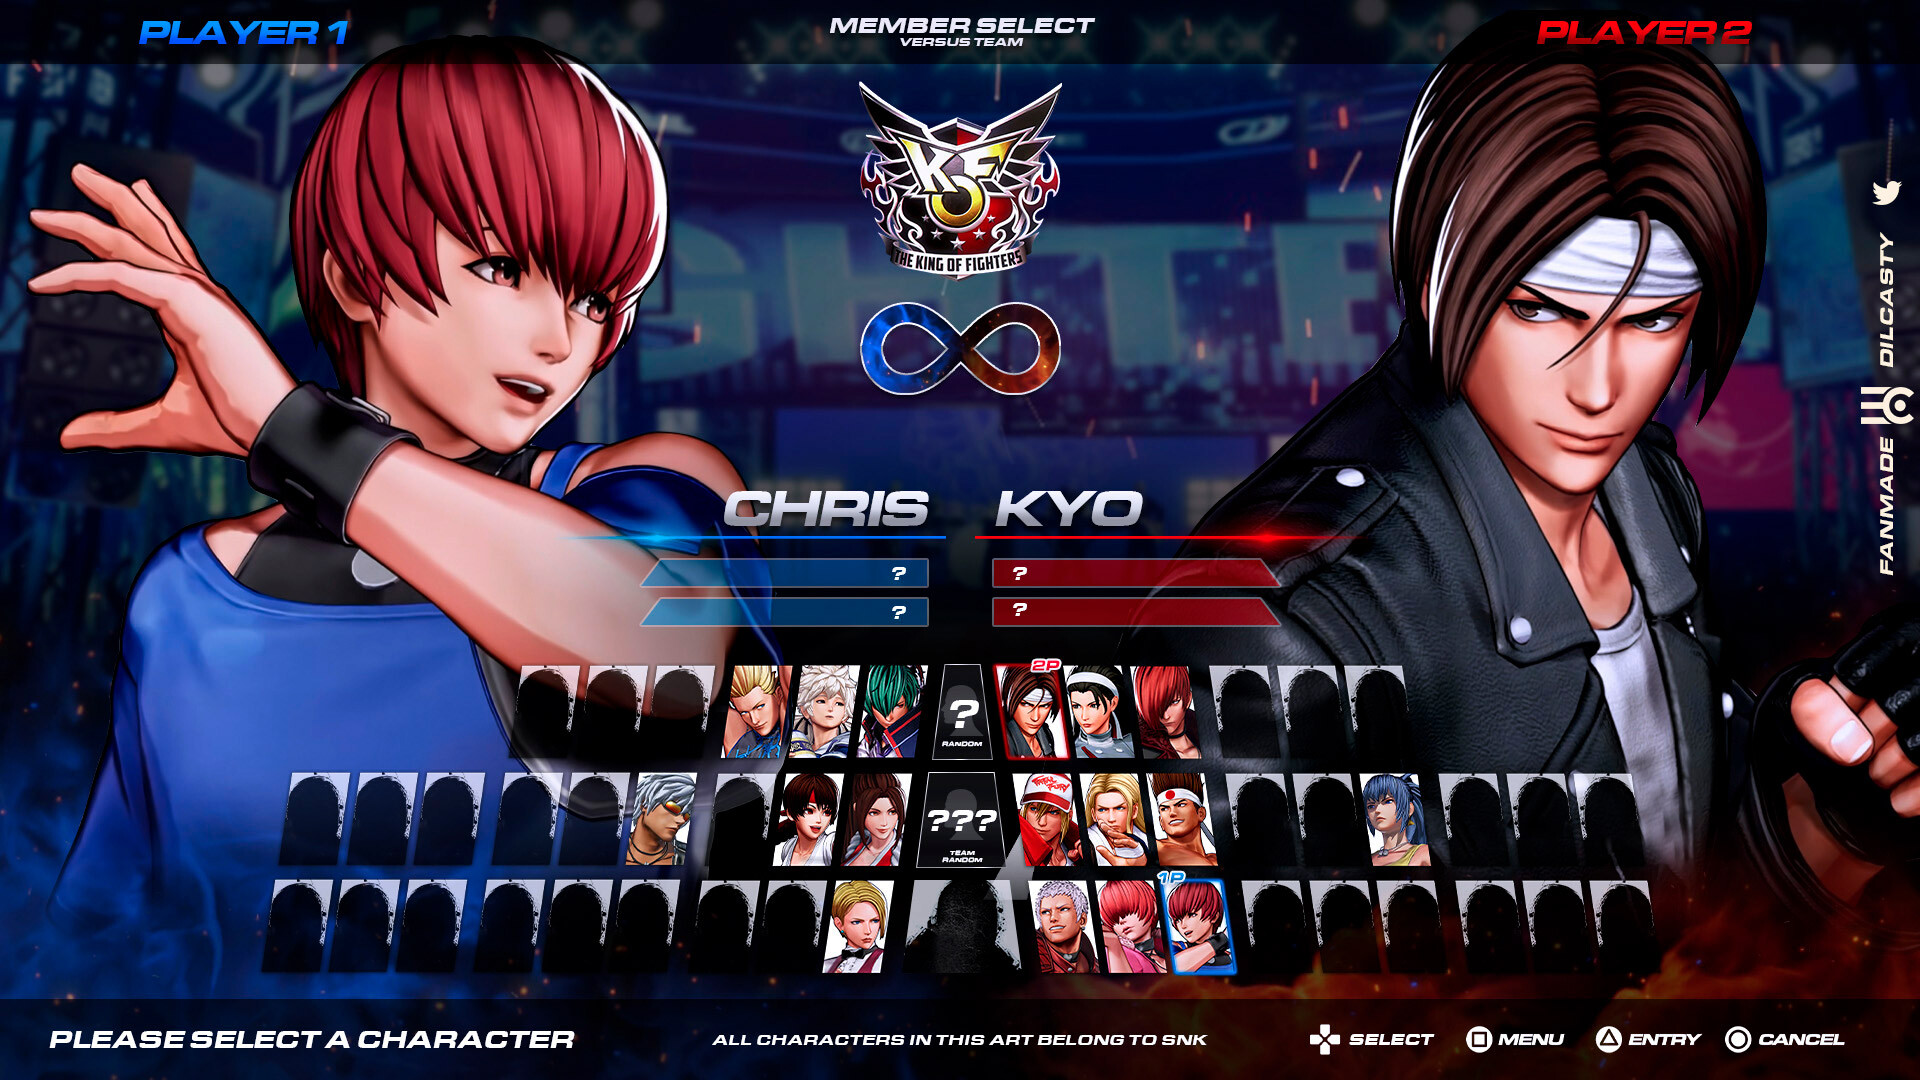 Stream The King Of Fighters XV - MEMBER SELECT (Character Select